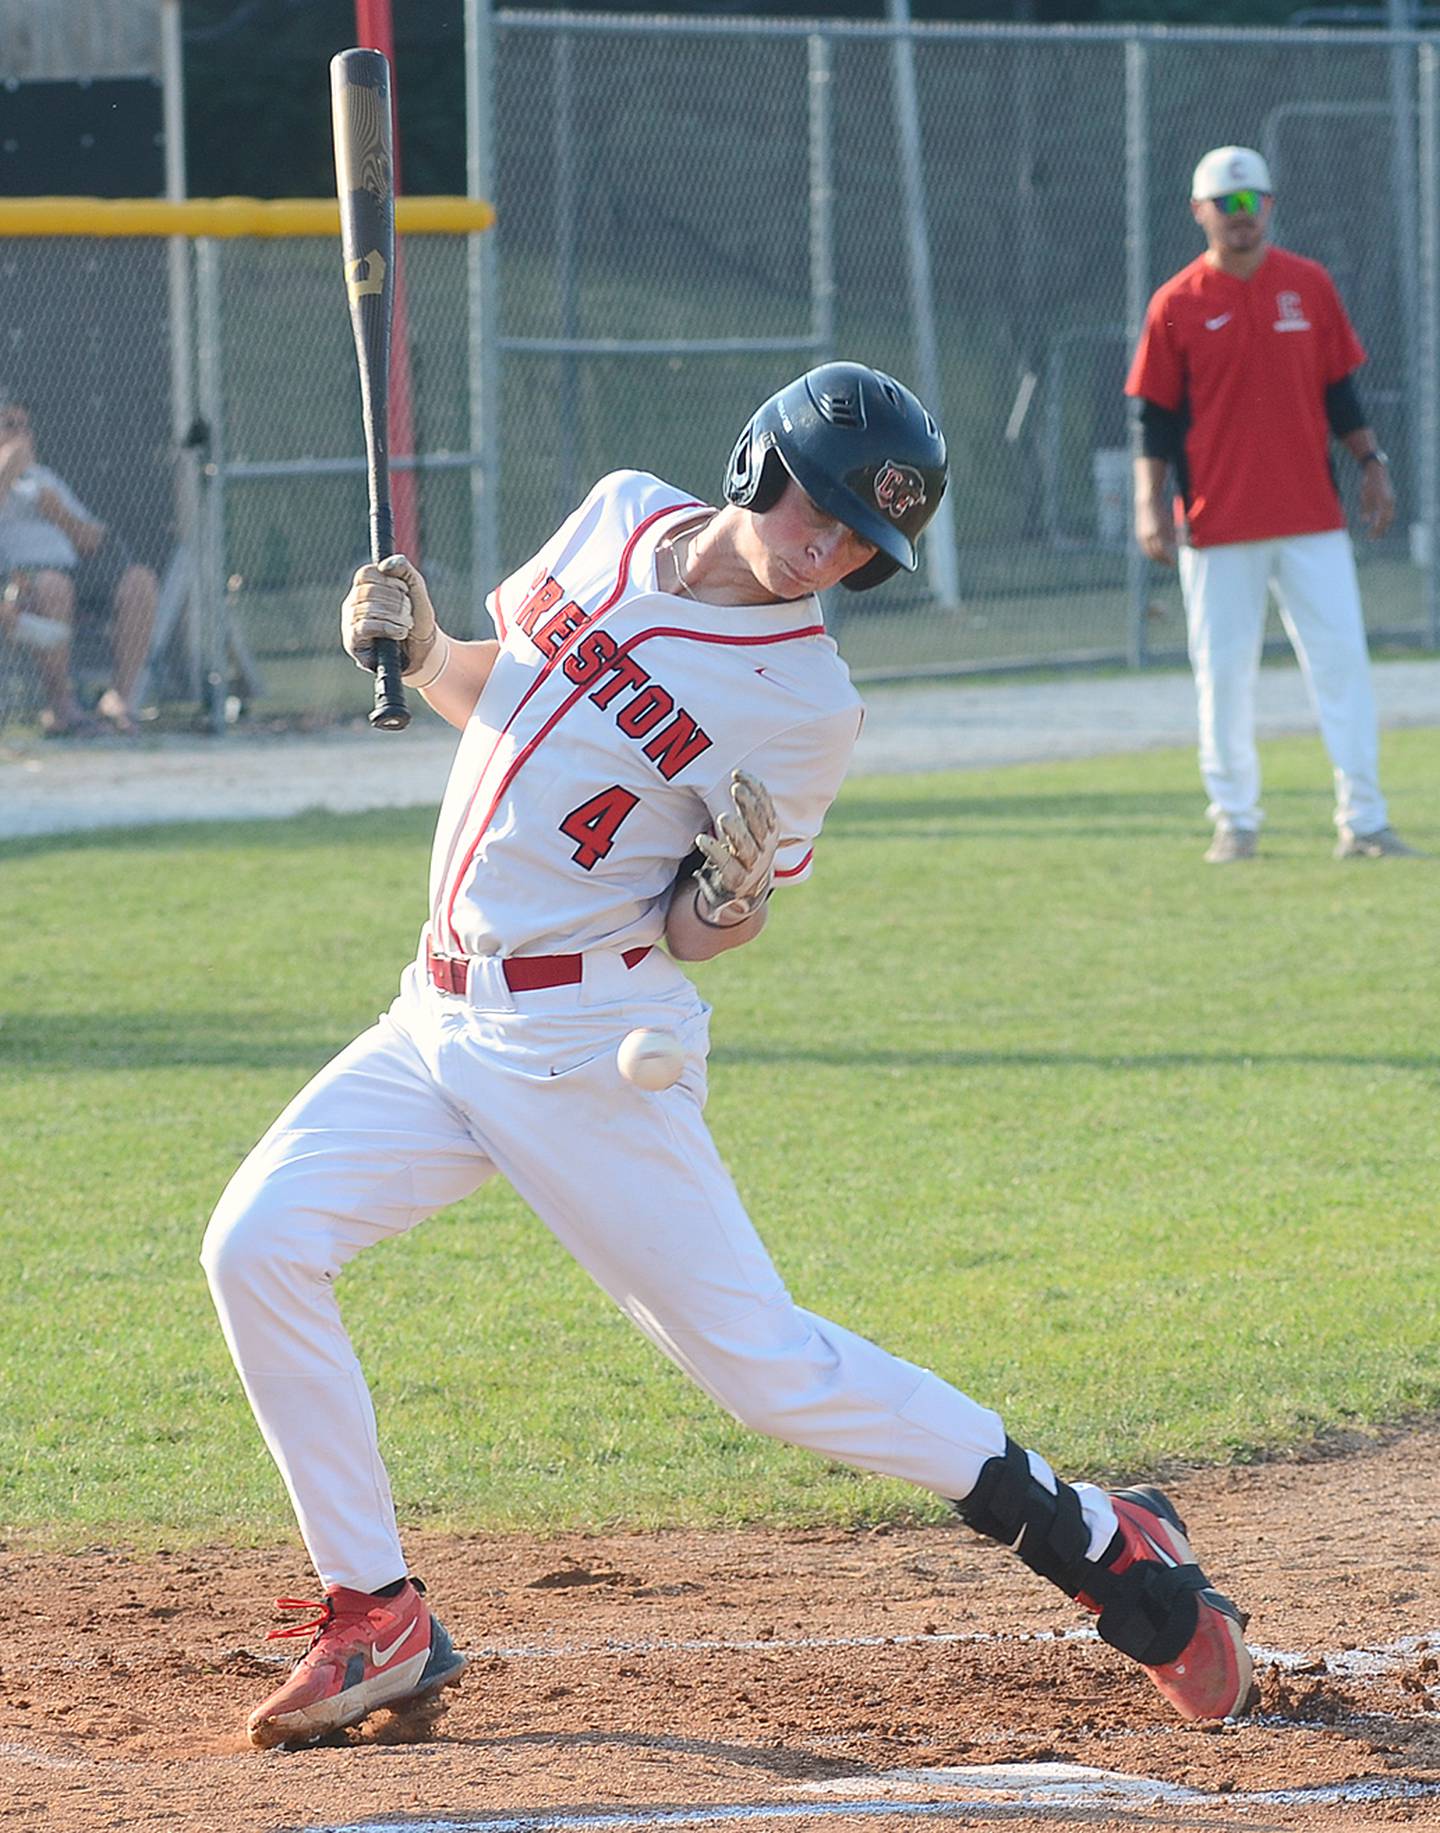 Creston's Cael Turner is hit by a pitch in the first inning against Clarinda on Thursday.